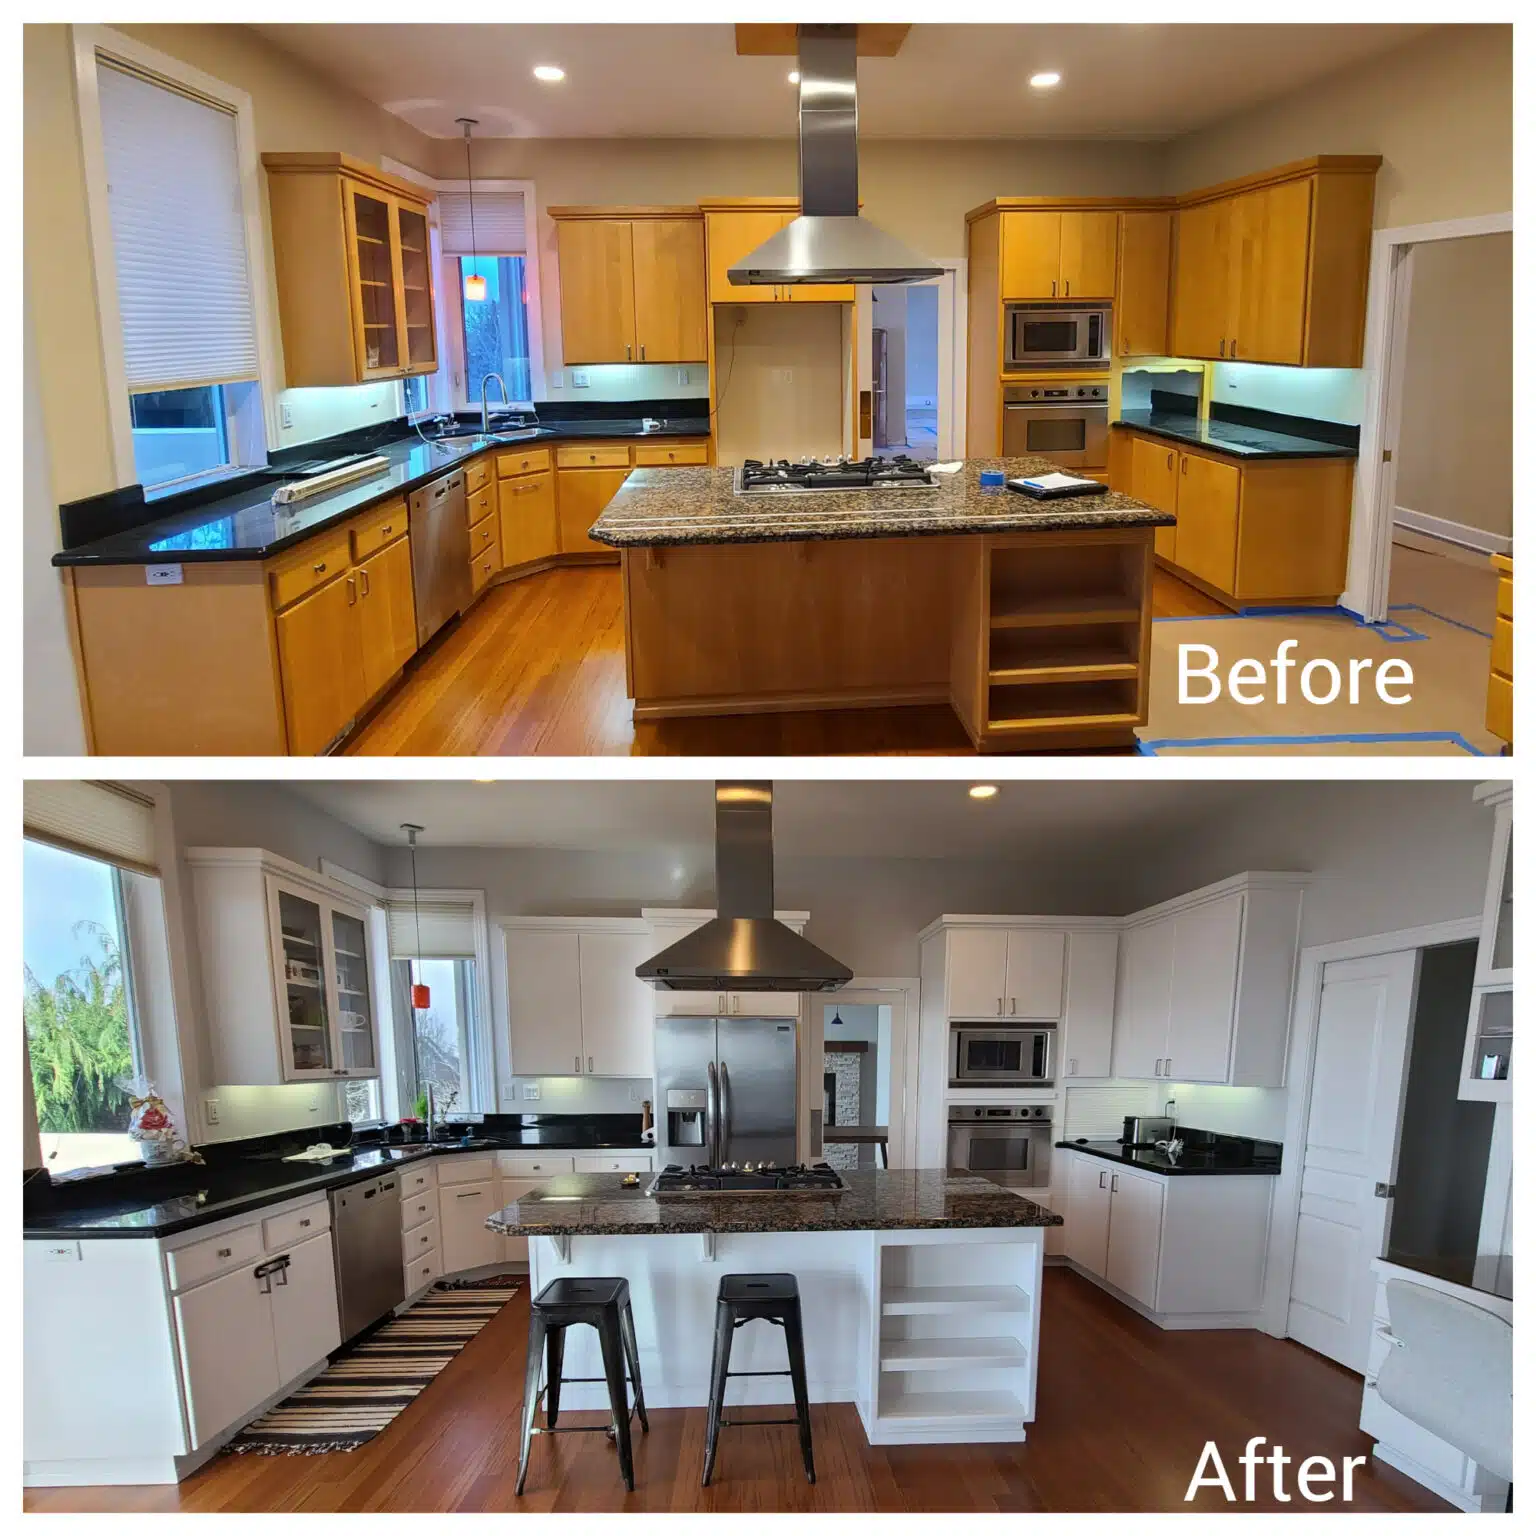 Photo of Do you paint cabinets? Why yes we do! in Portland, Oregon